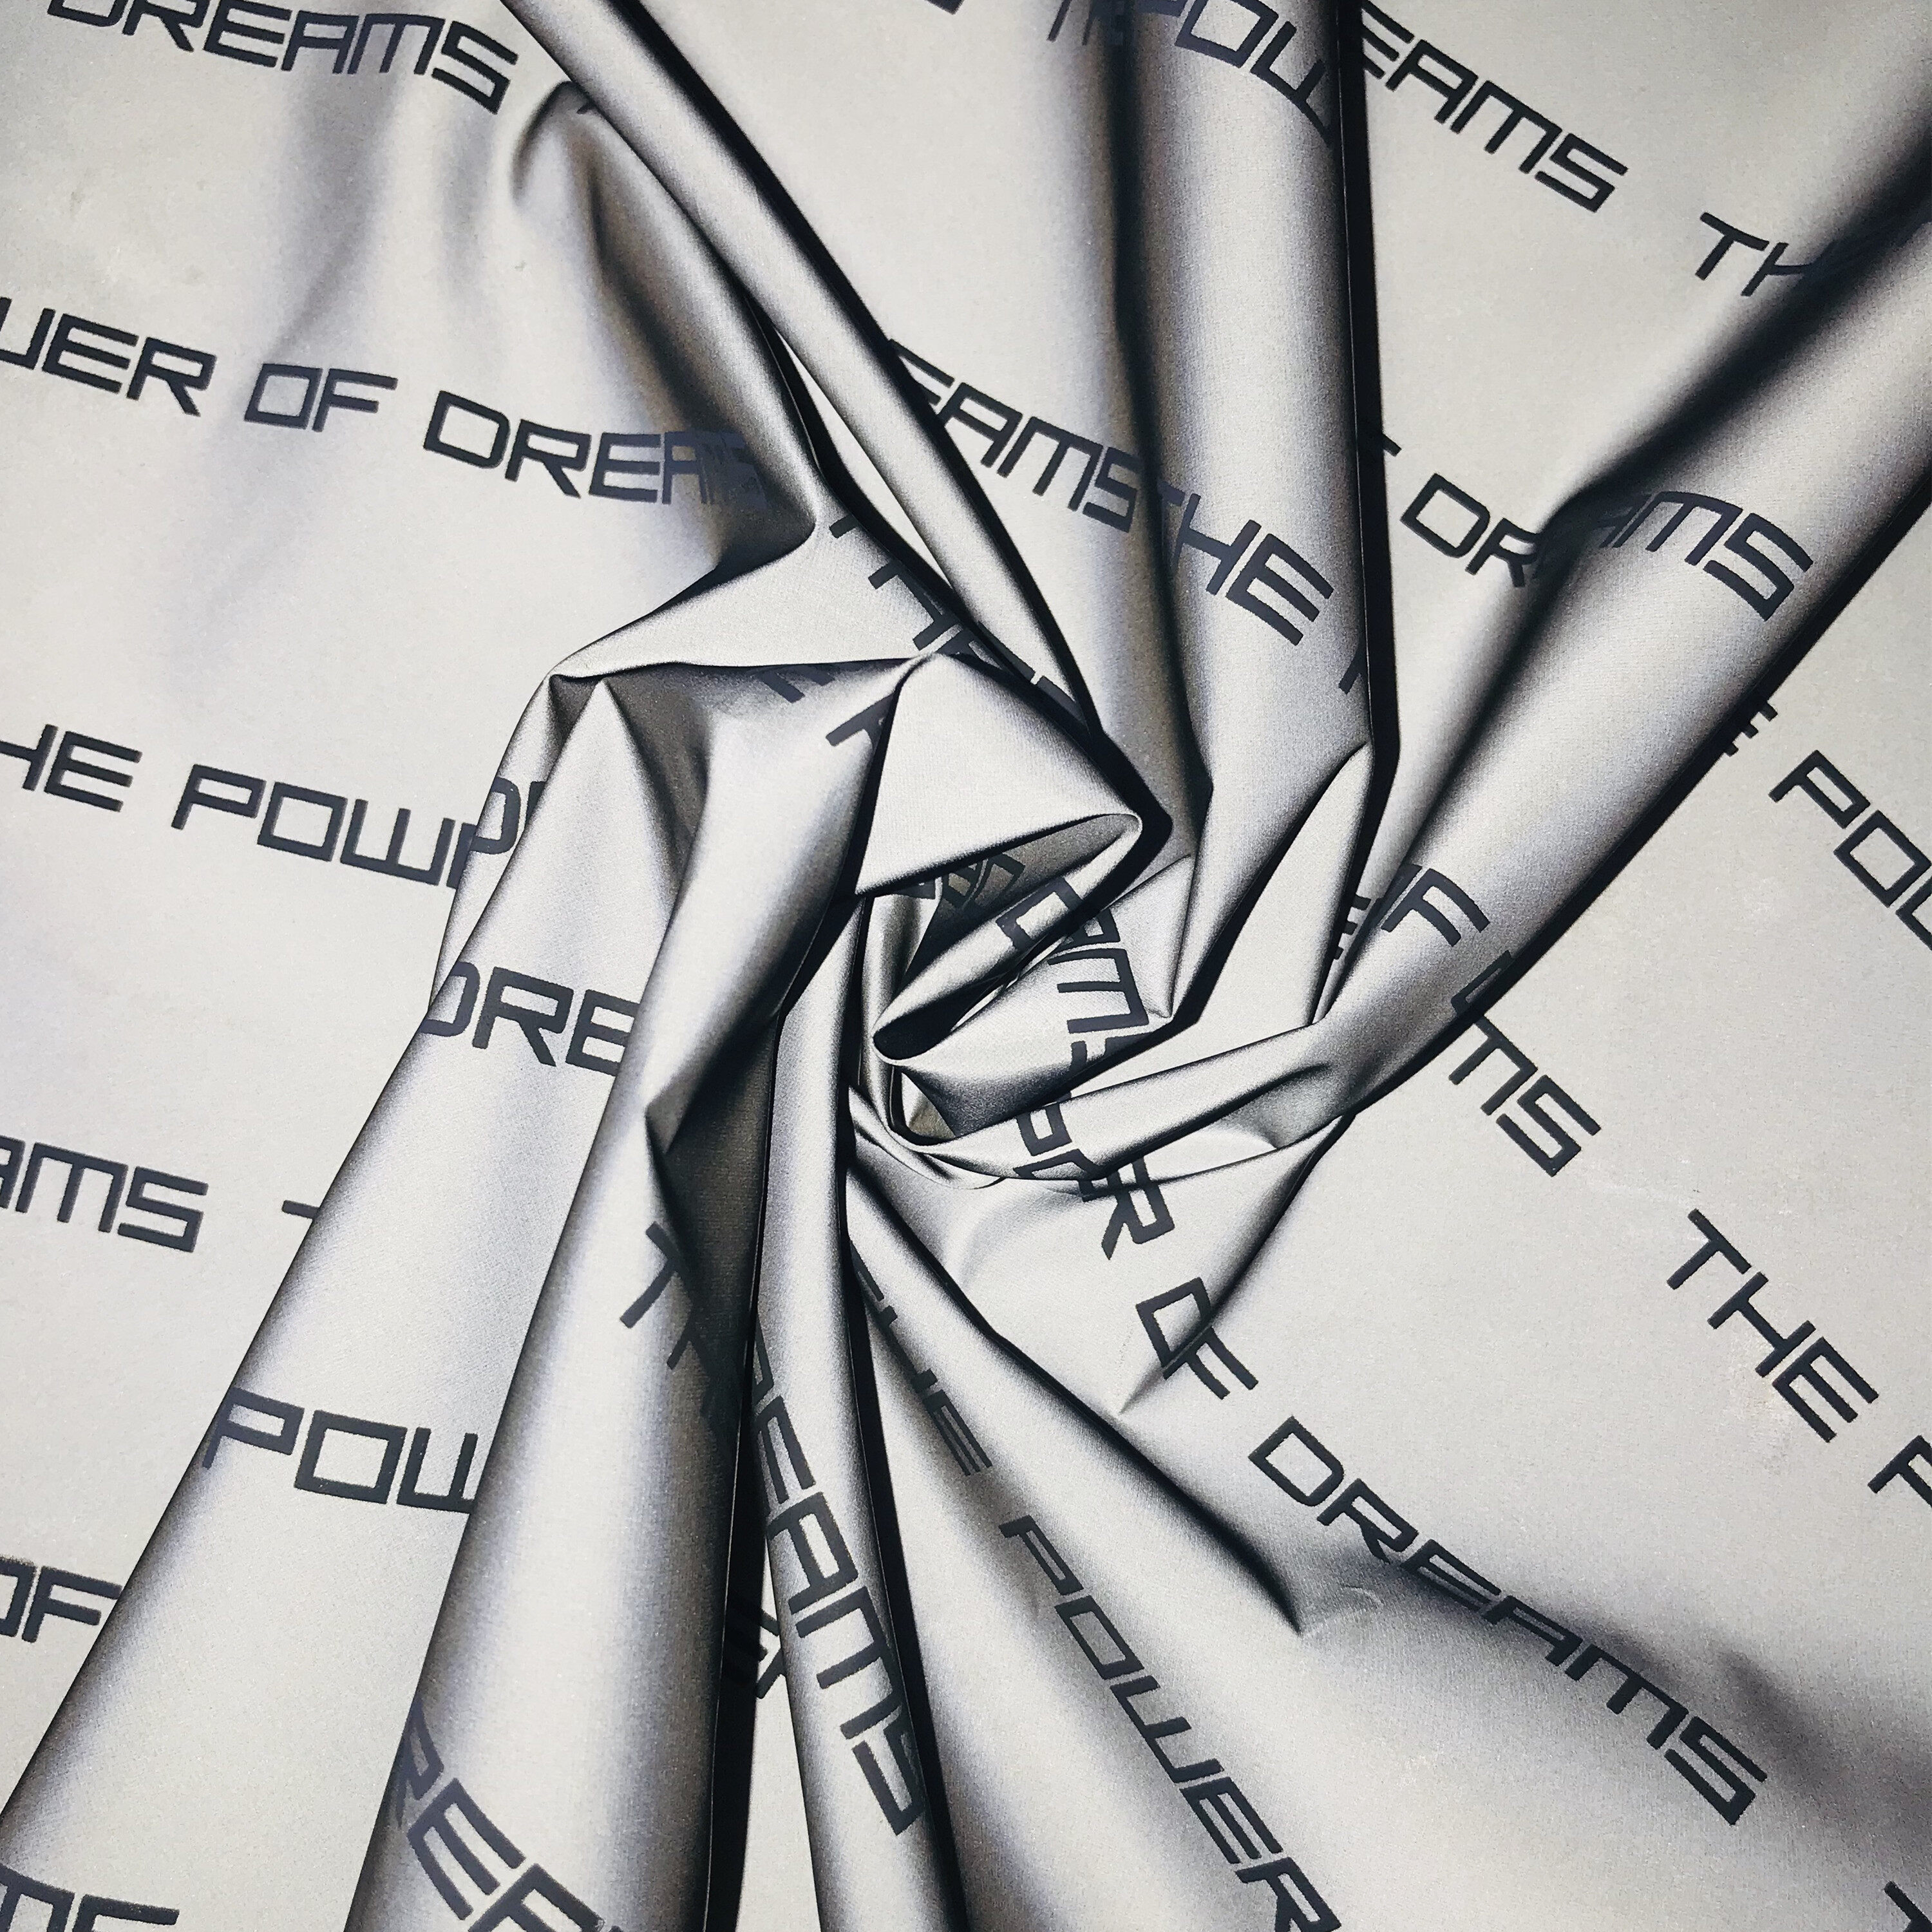 100%p reflective fabric with Letter design